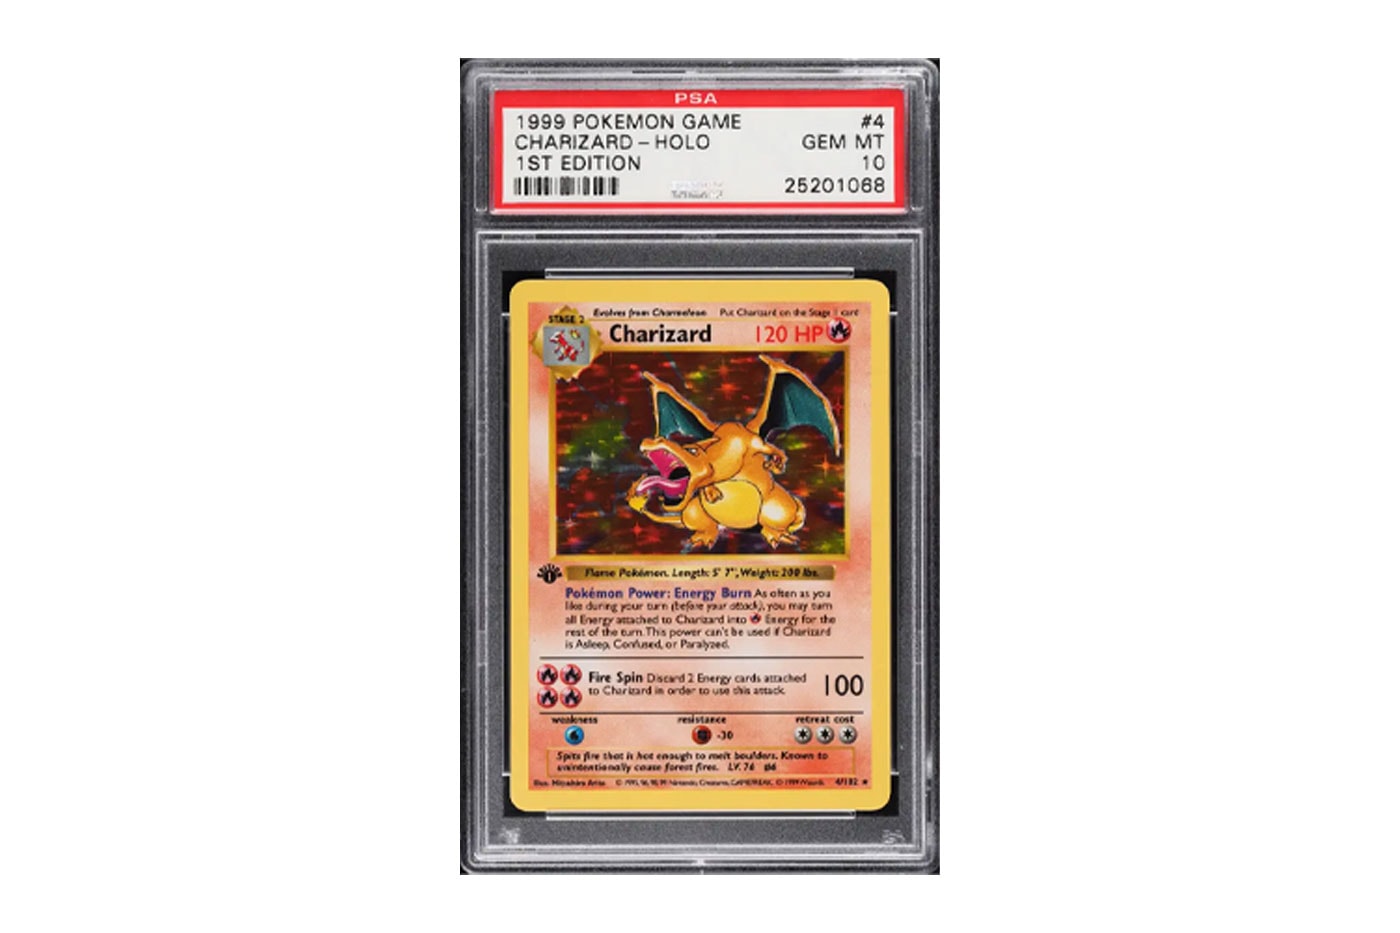 https://image-cdn.hypb.st/https%3A%2F%2Fhypebeast.com%2Fimage%2F2022%2F03%2F1999-pokemon-base-set-shadowless-first-edition-holo-charizard-all-time-record-420k-usd-pwcc-auctions-001.jpg?cbr=1&q=90